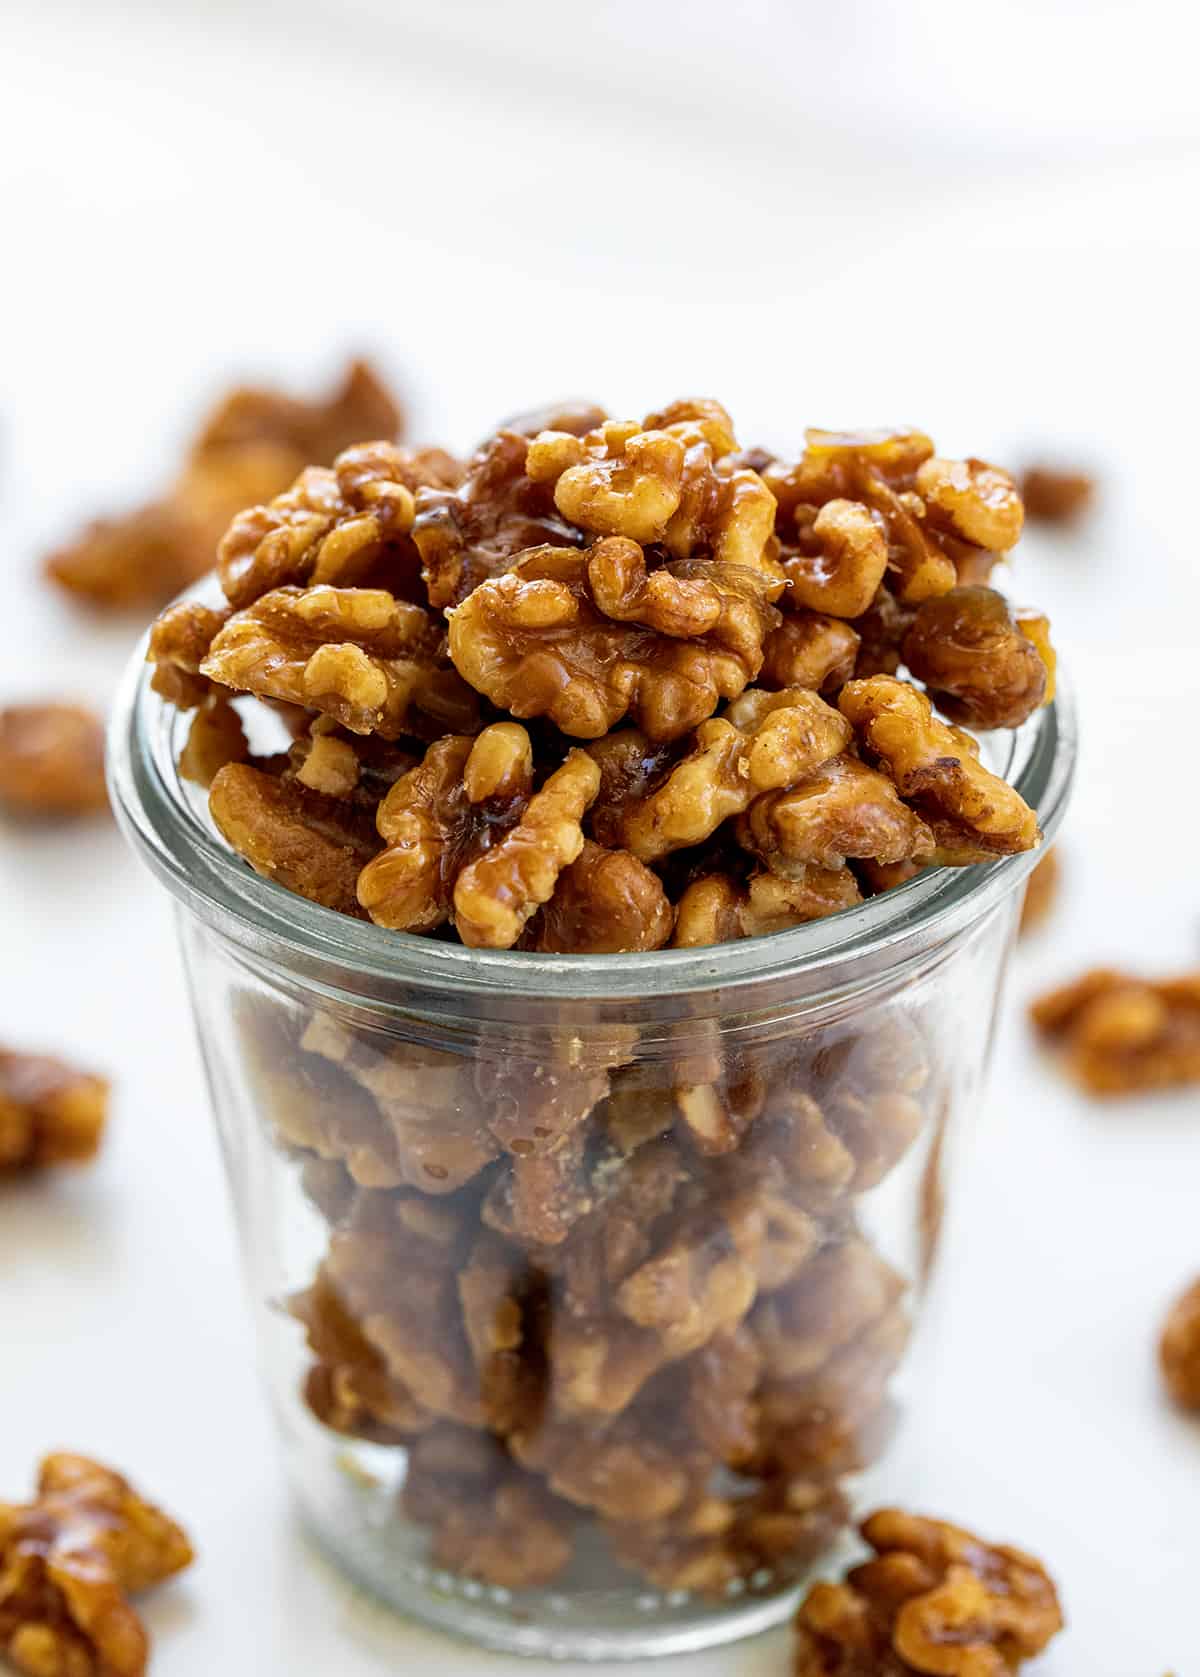 Jar of Candied Walnuts with Some Scattered Around it.